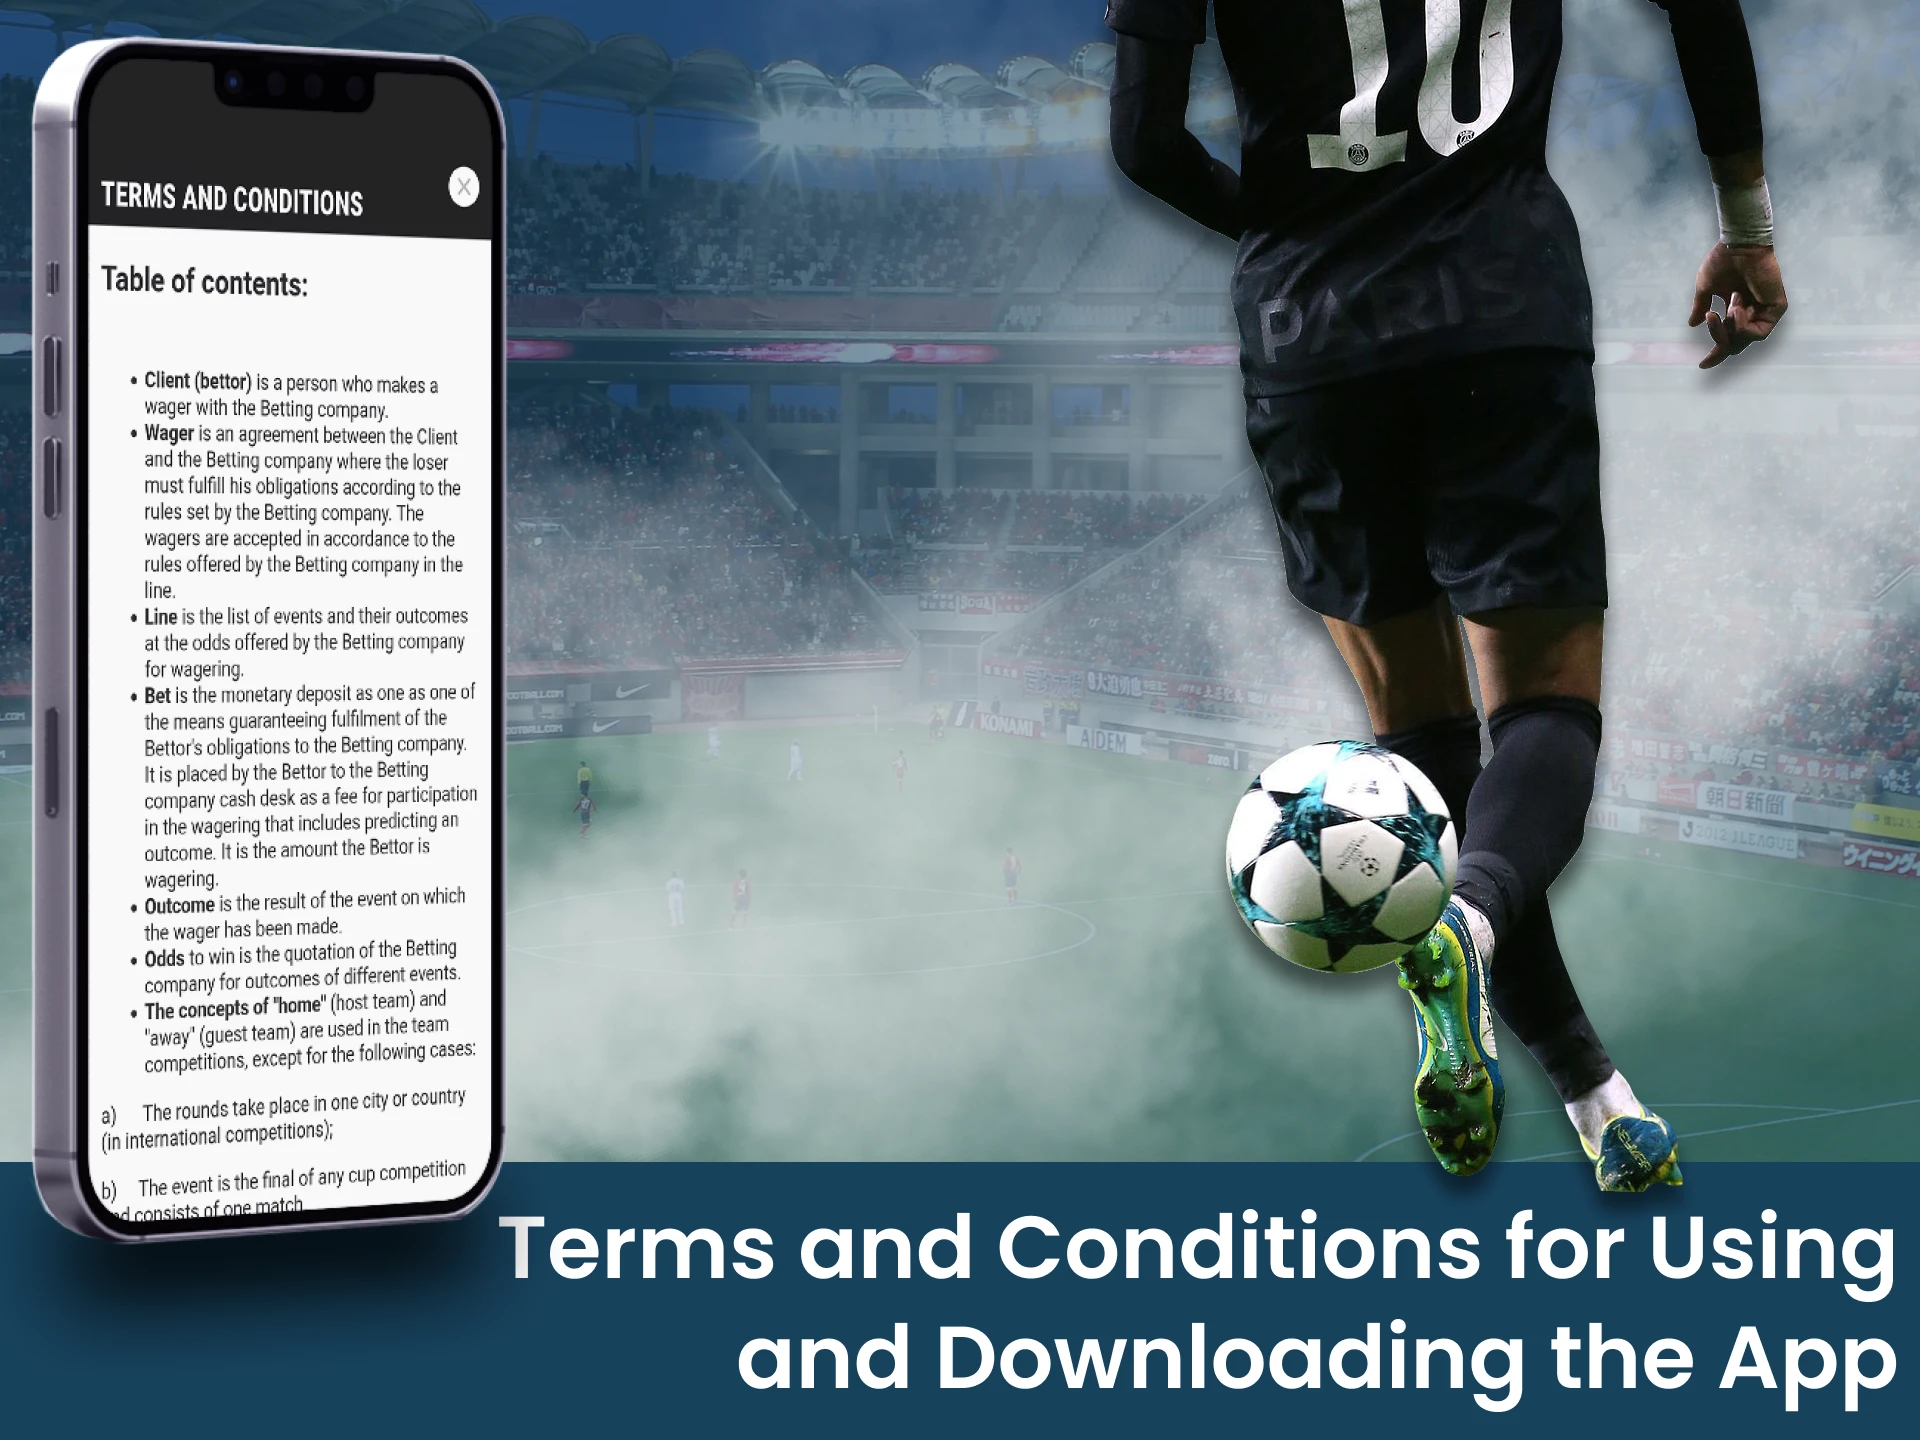 Read these terms of using the football betting apps.